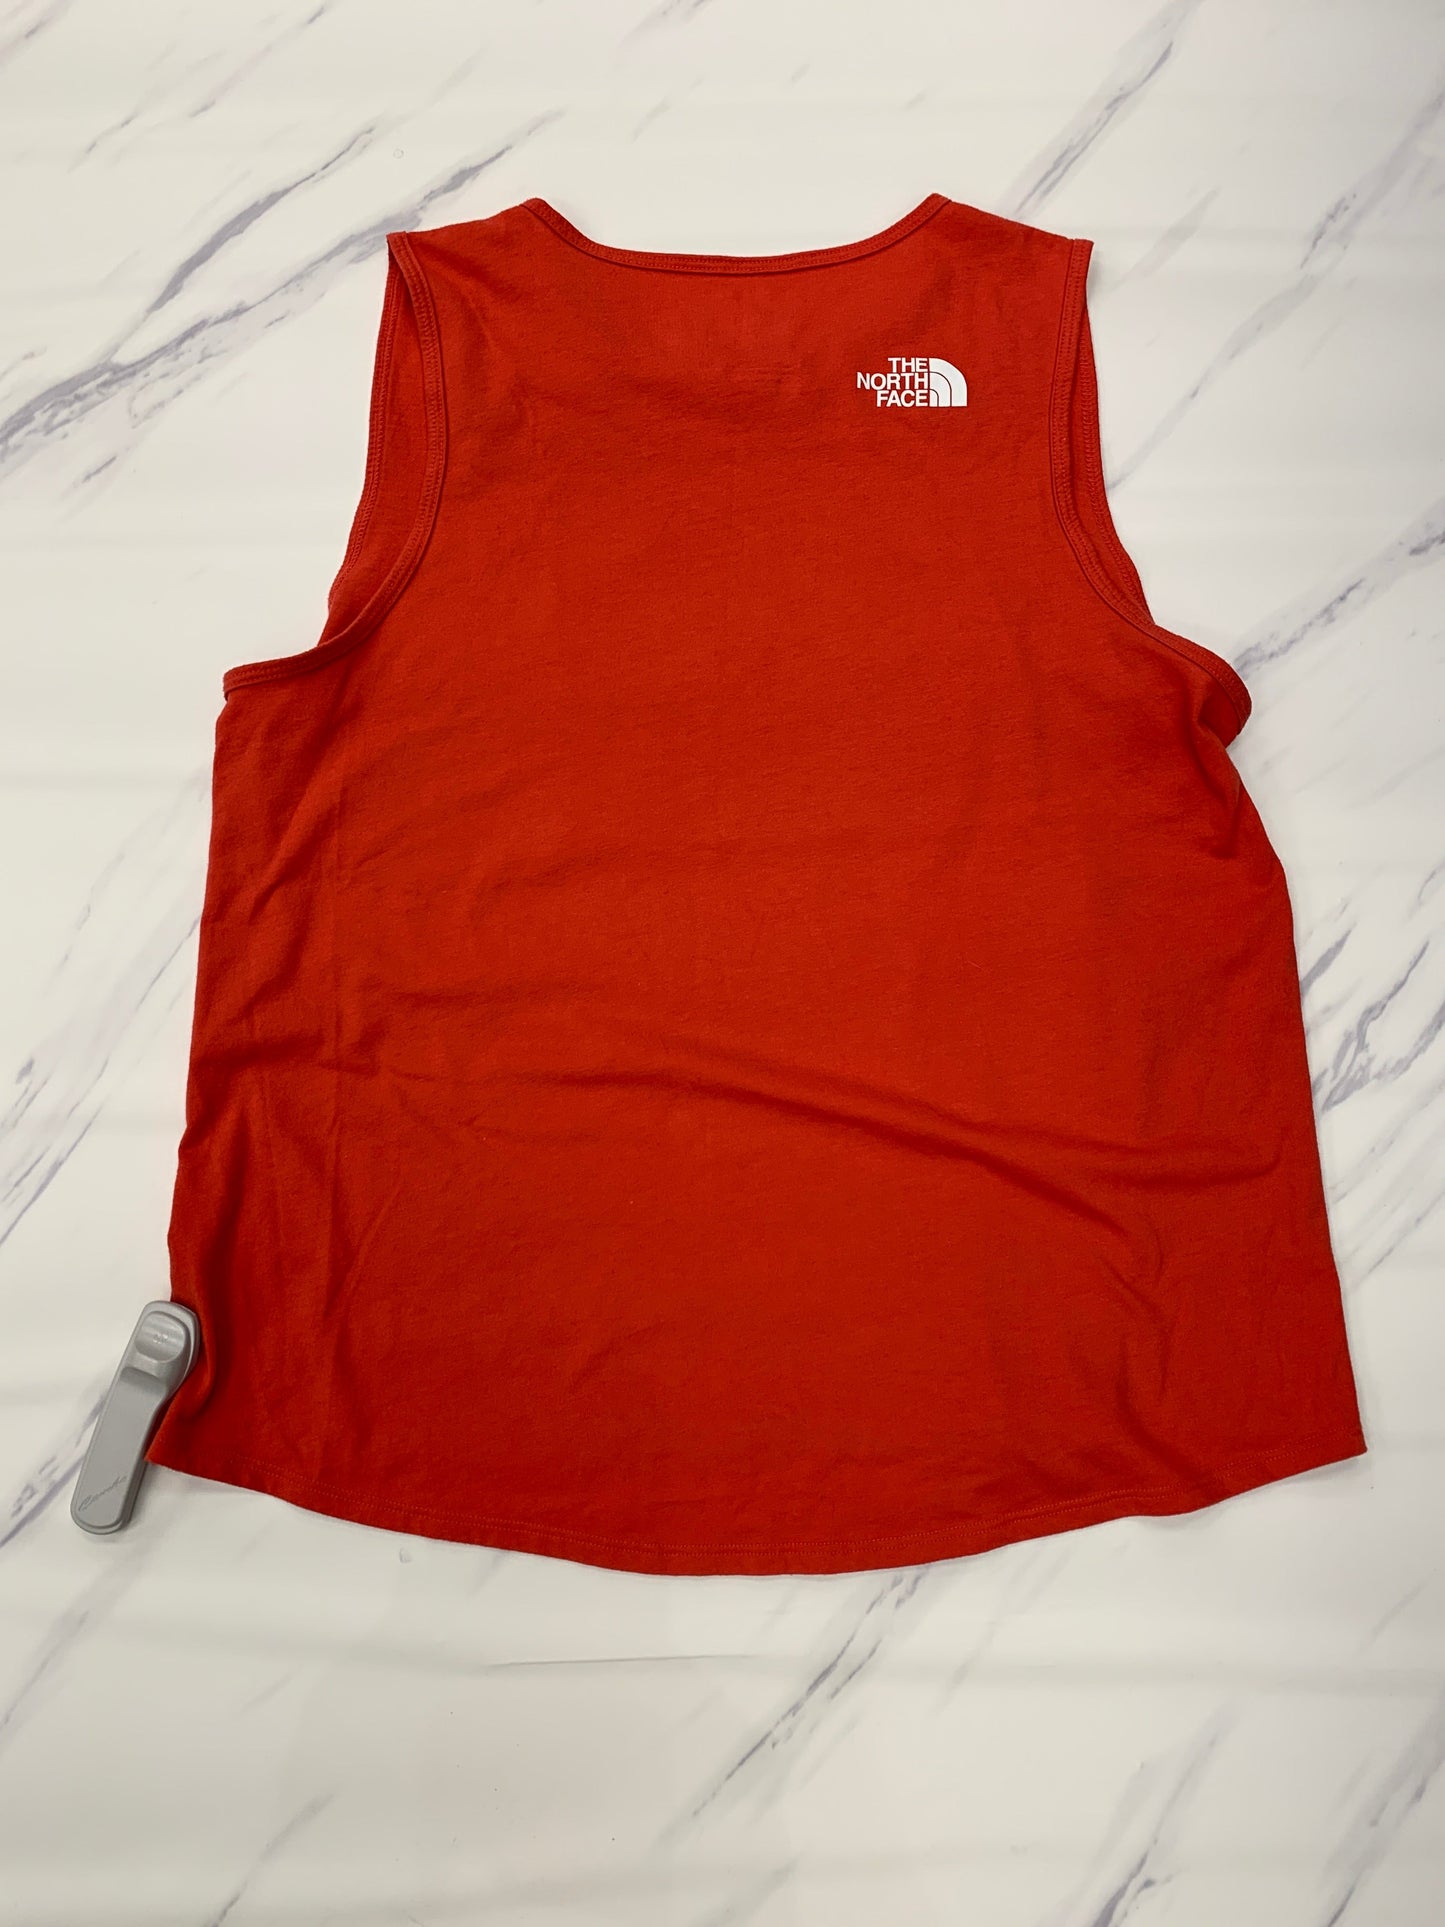 Athletic Tank Top The North Face, Size L